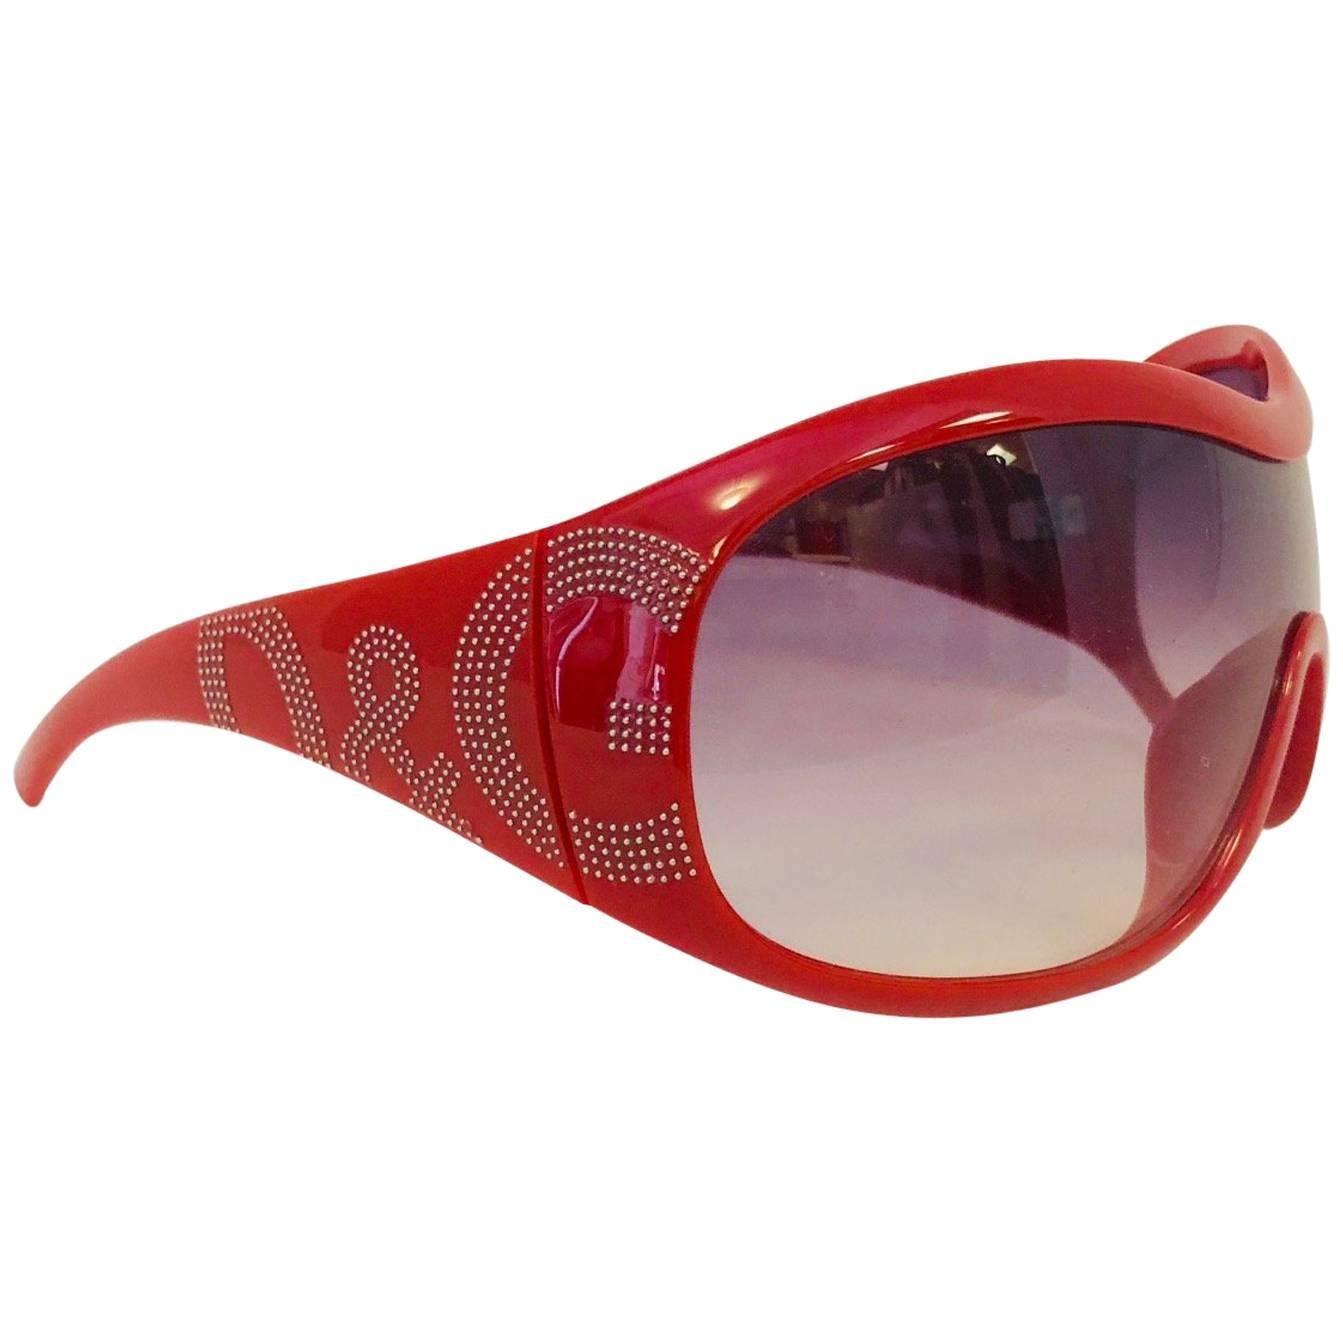 Men's Delicious D&G Dolce & Gabbana Wrap Sunglasses in Hot Red For Sale